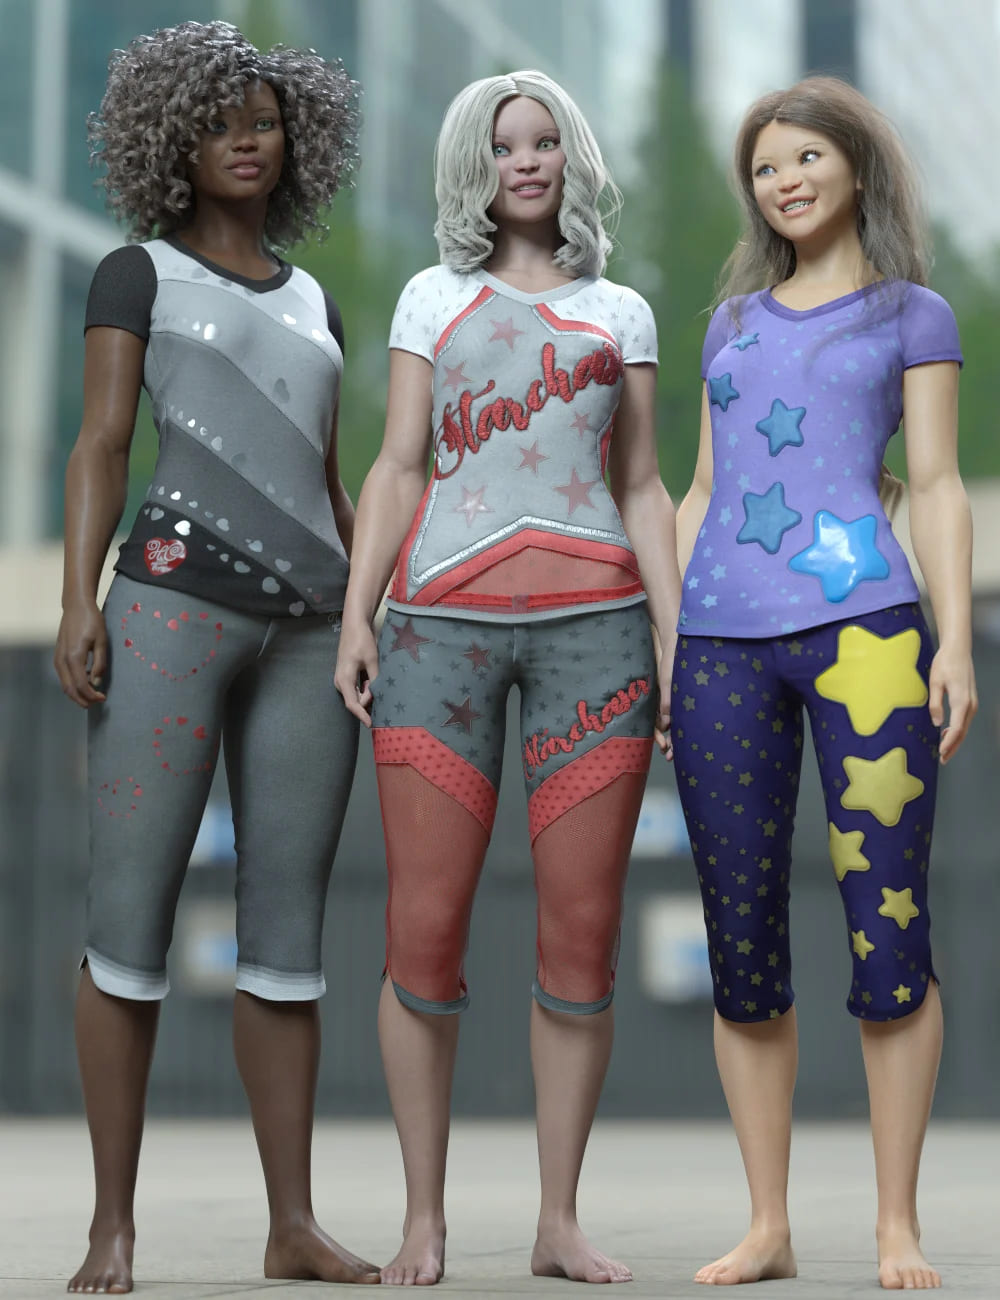 Playful Styles for Everyday 2 Clothes and Poses Texture Add-on_DAZ3D下载站